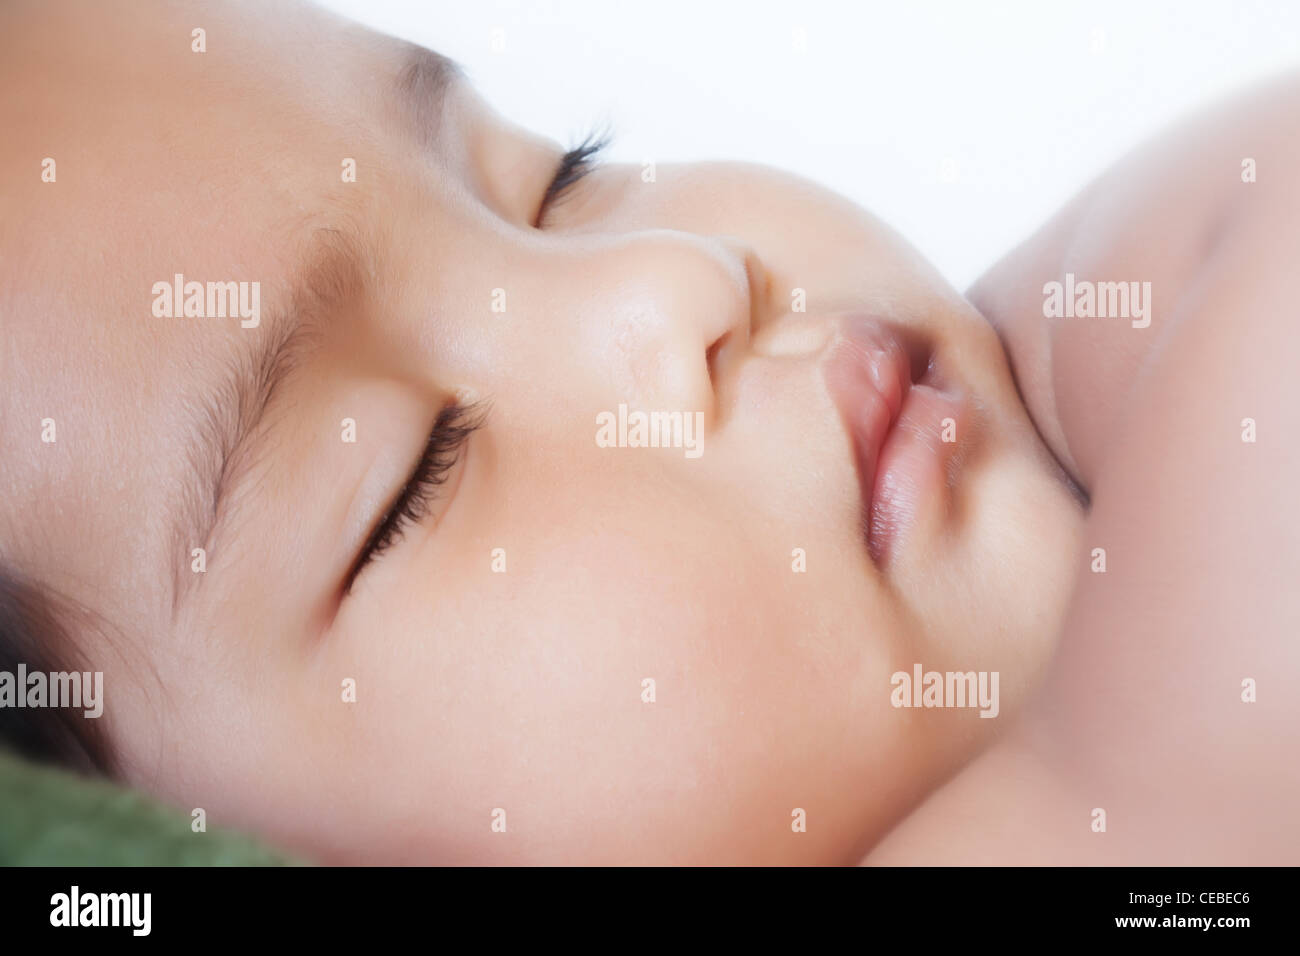 Cute 13 month old baby sleeping or dreaming peacefully during the day Stock Photo